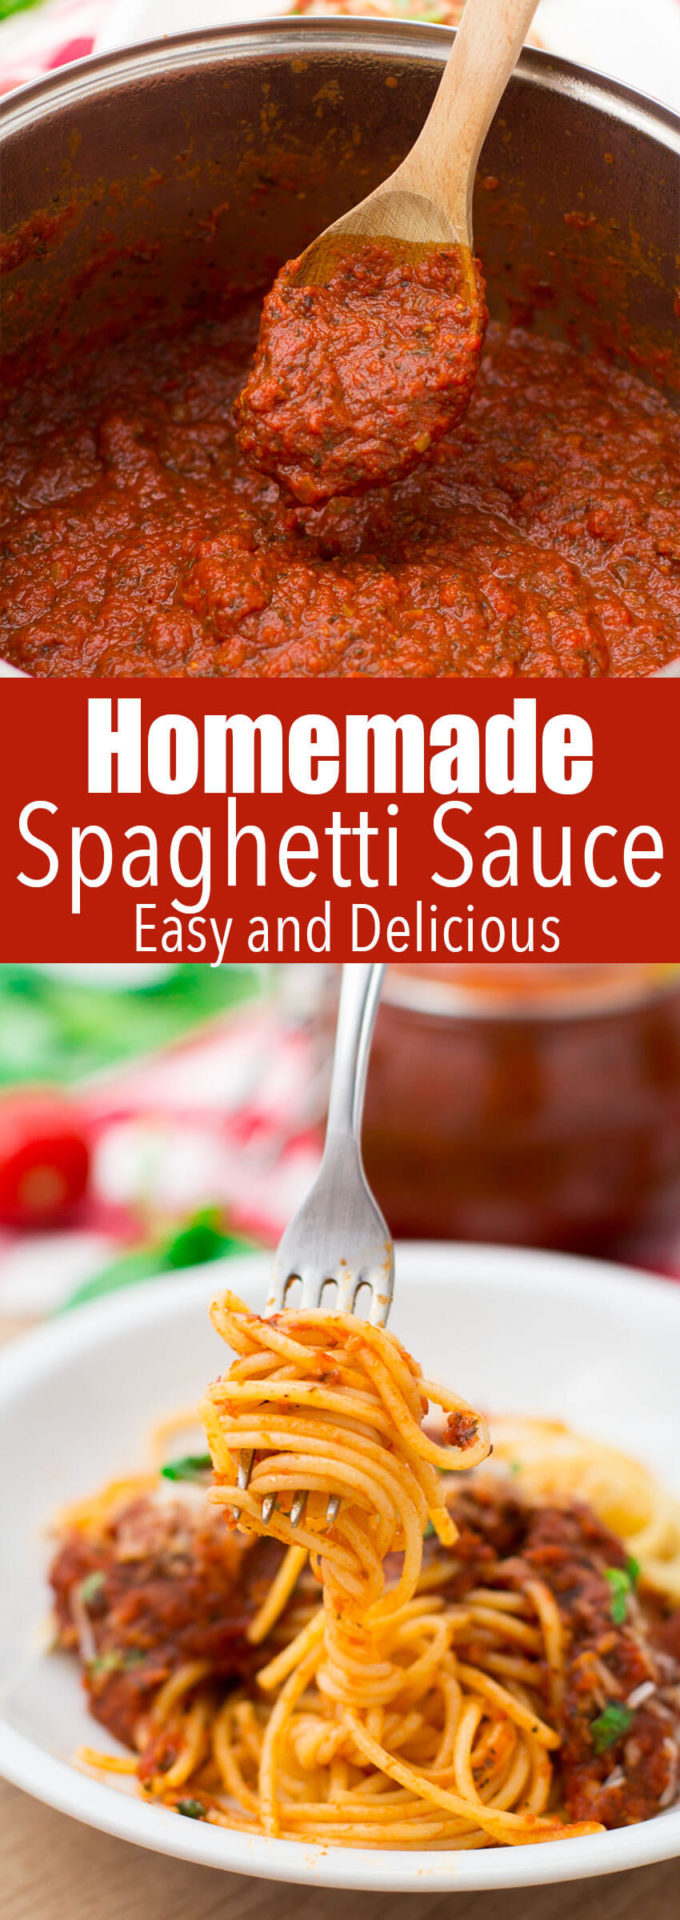 Homemade Spaghetti Sauce: This spaghetti sauce has a robust flavor, is easy to make, uses easy to find ingredients, and is absolutely delicious.